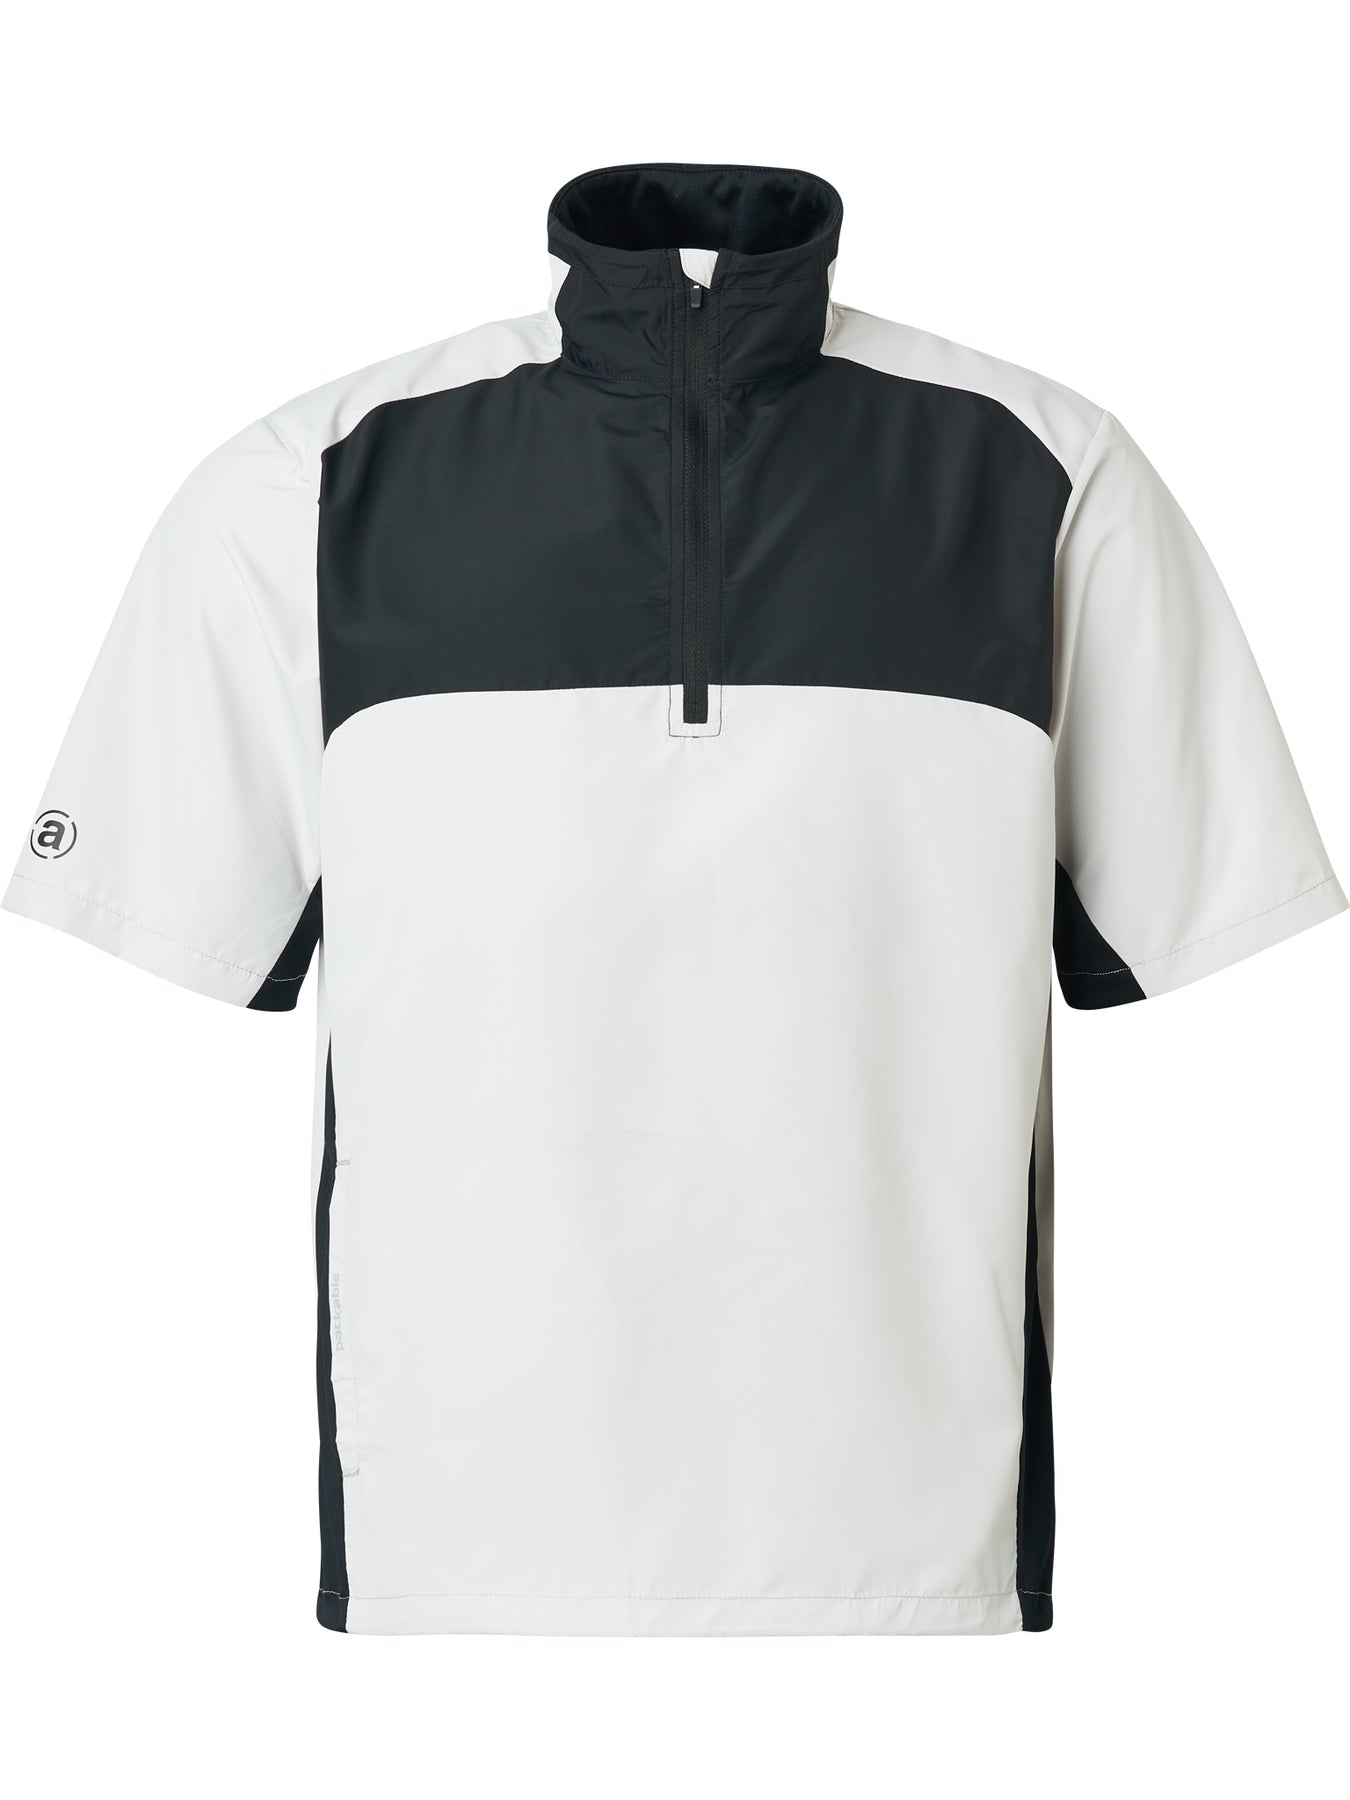 Abacus Men's Hills Stretch Wind Shirt